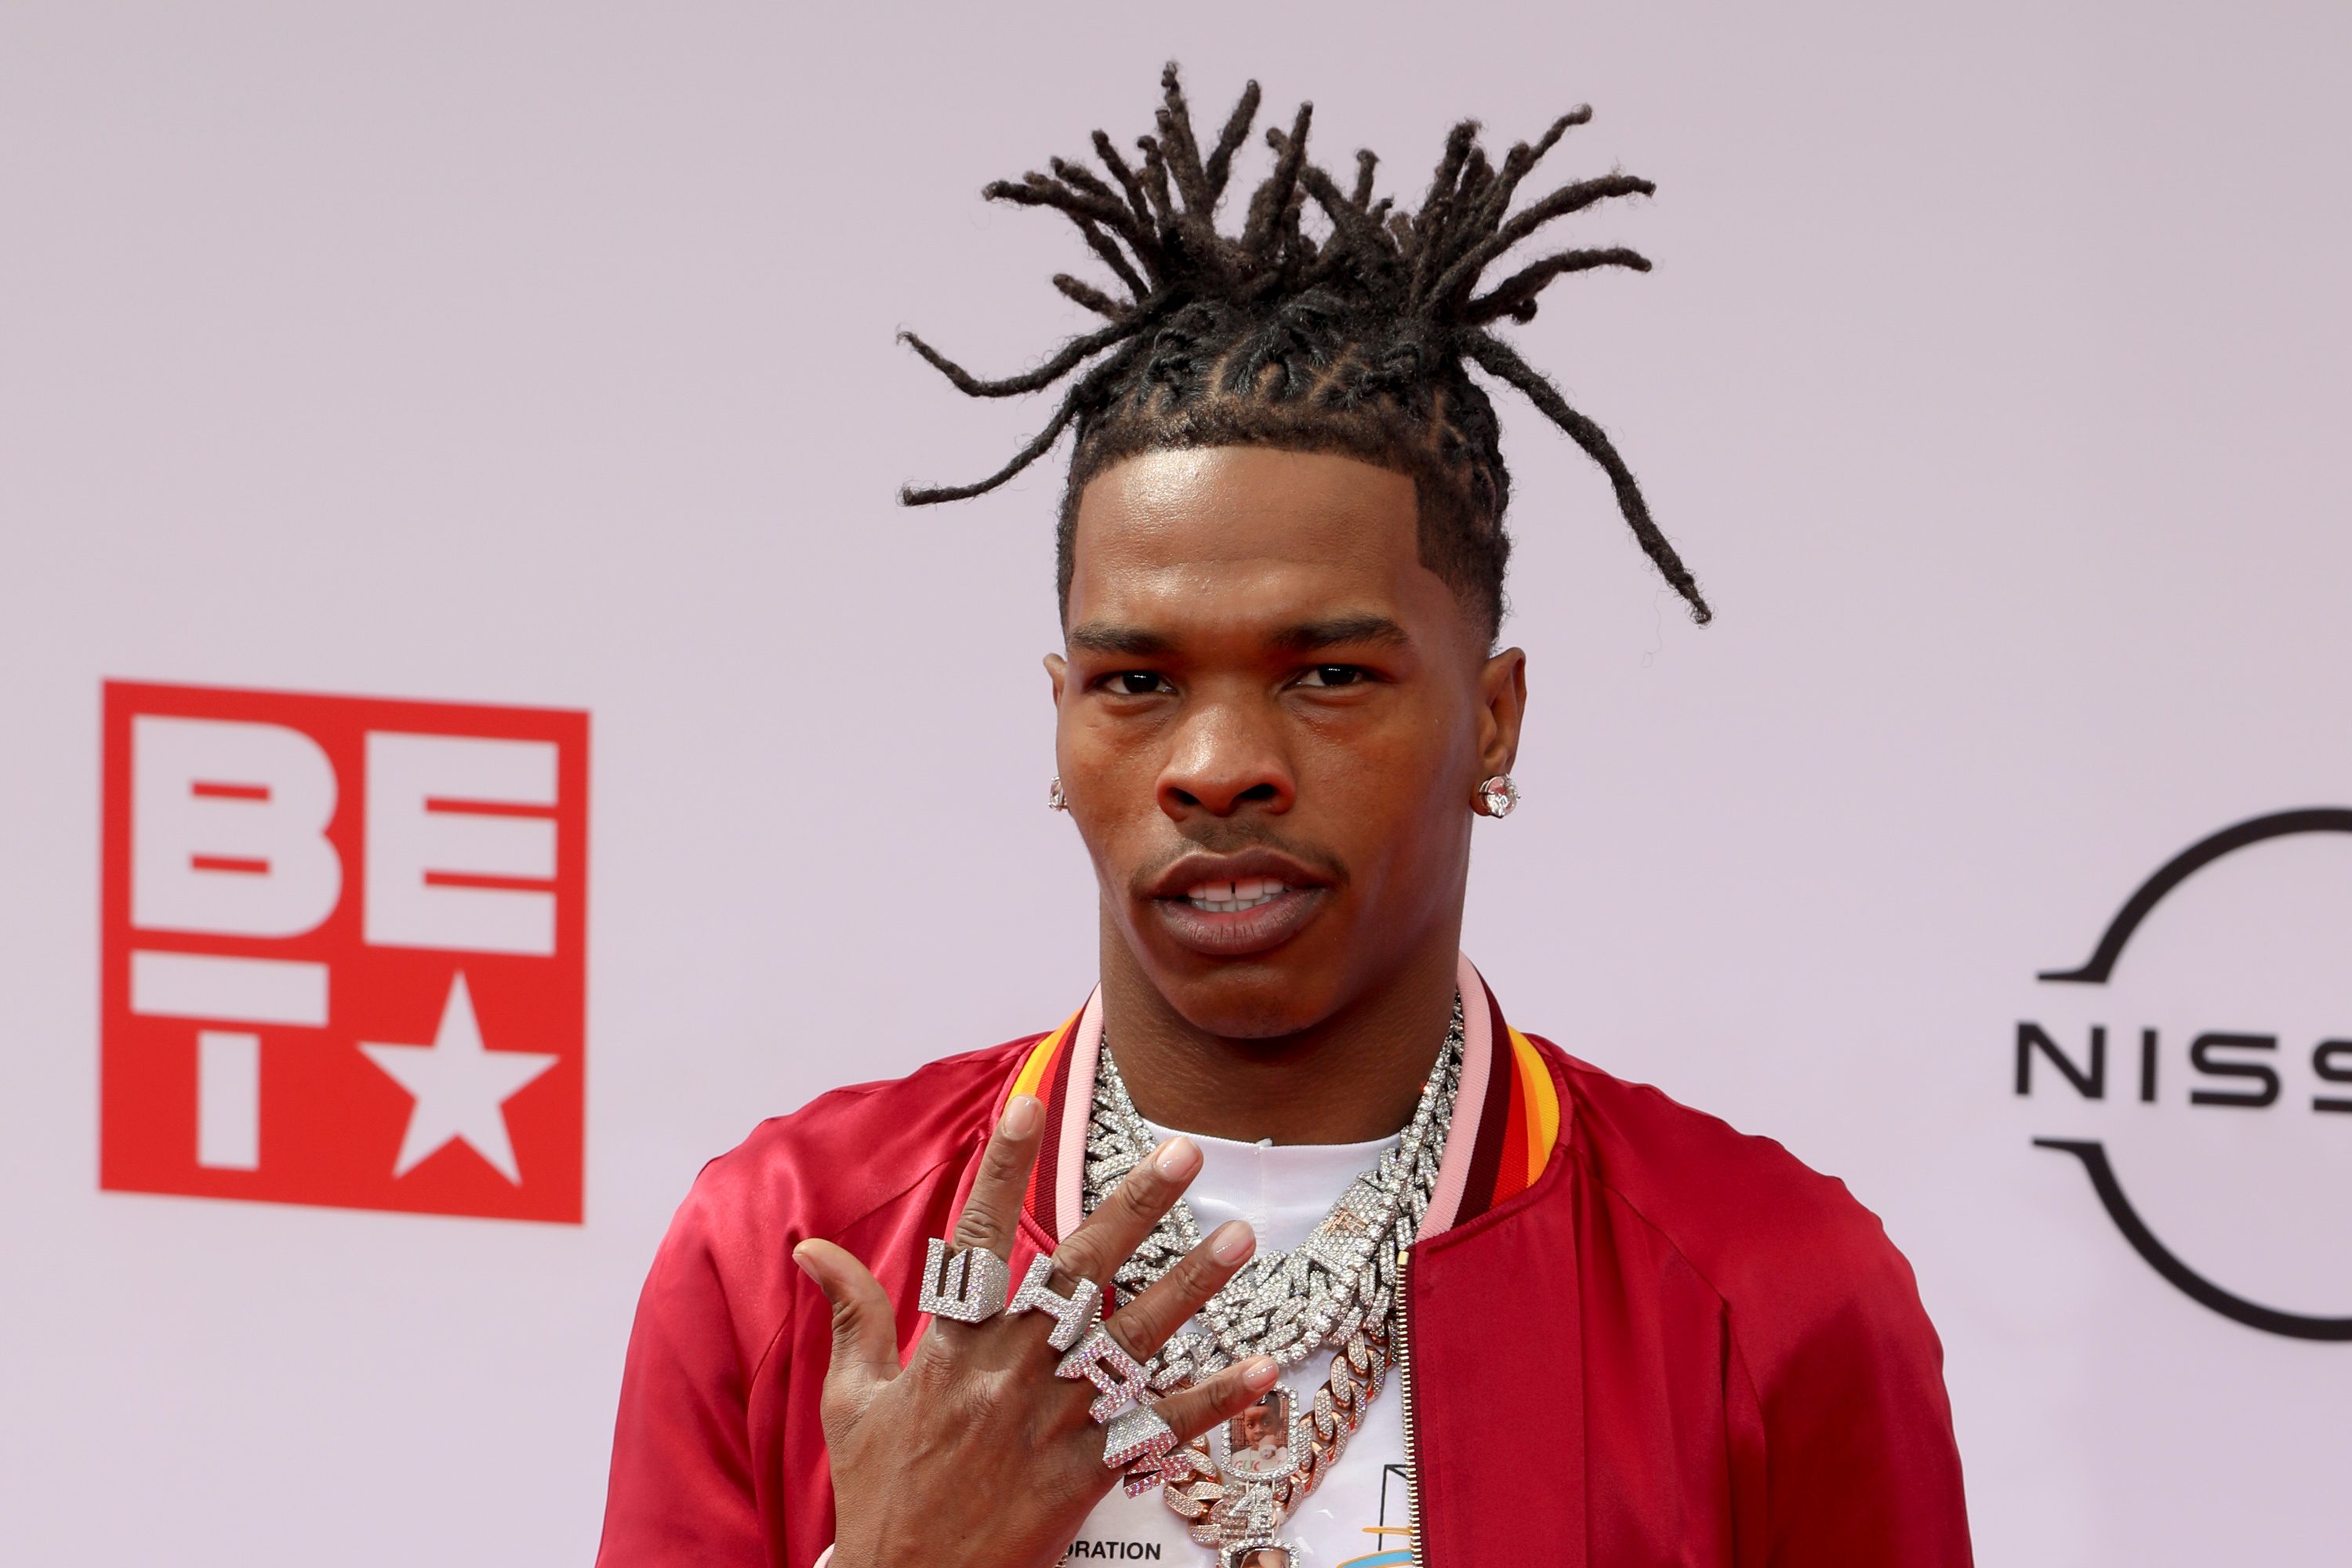 Rapper Lil Baby arrested in Paris for carrying cannabis – report